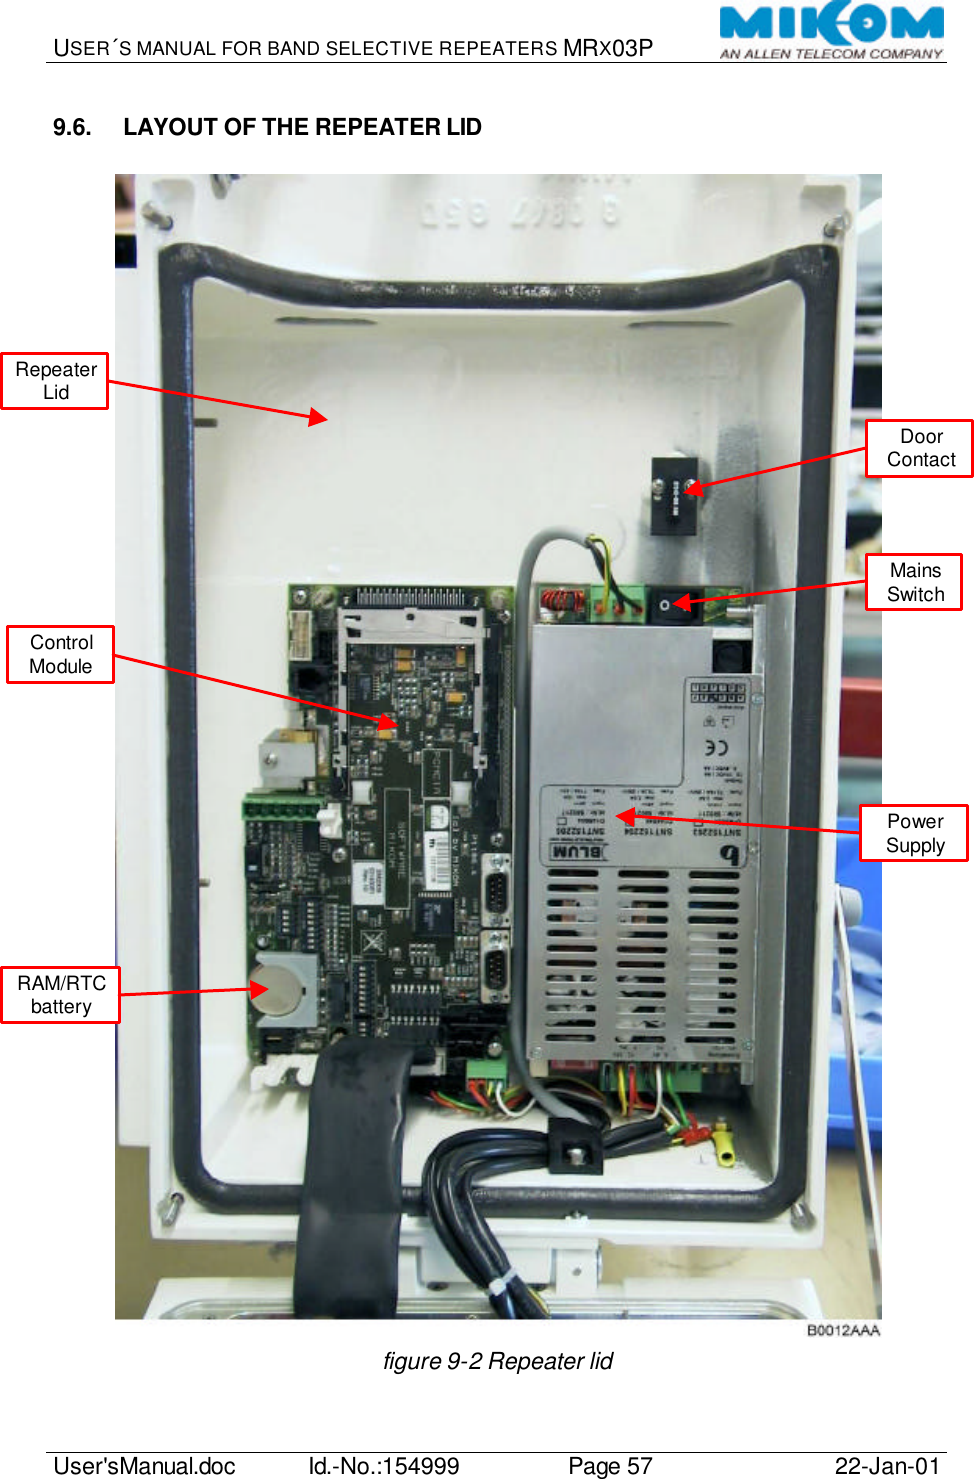 USER´S MANUAL FOR BAND SELECTIVE REPEATERS MRX03P   User&apos;sManual.doc Id.-No.:154999 Page 57 22-Jan-01  9.6. LAYOUT OF THE REPEATER LID   figure 9-2 Repeater lid Mains Switch Door Contact Power Supply Repeater Lid Control Module RAM/RTC battery 